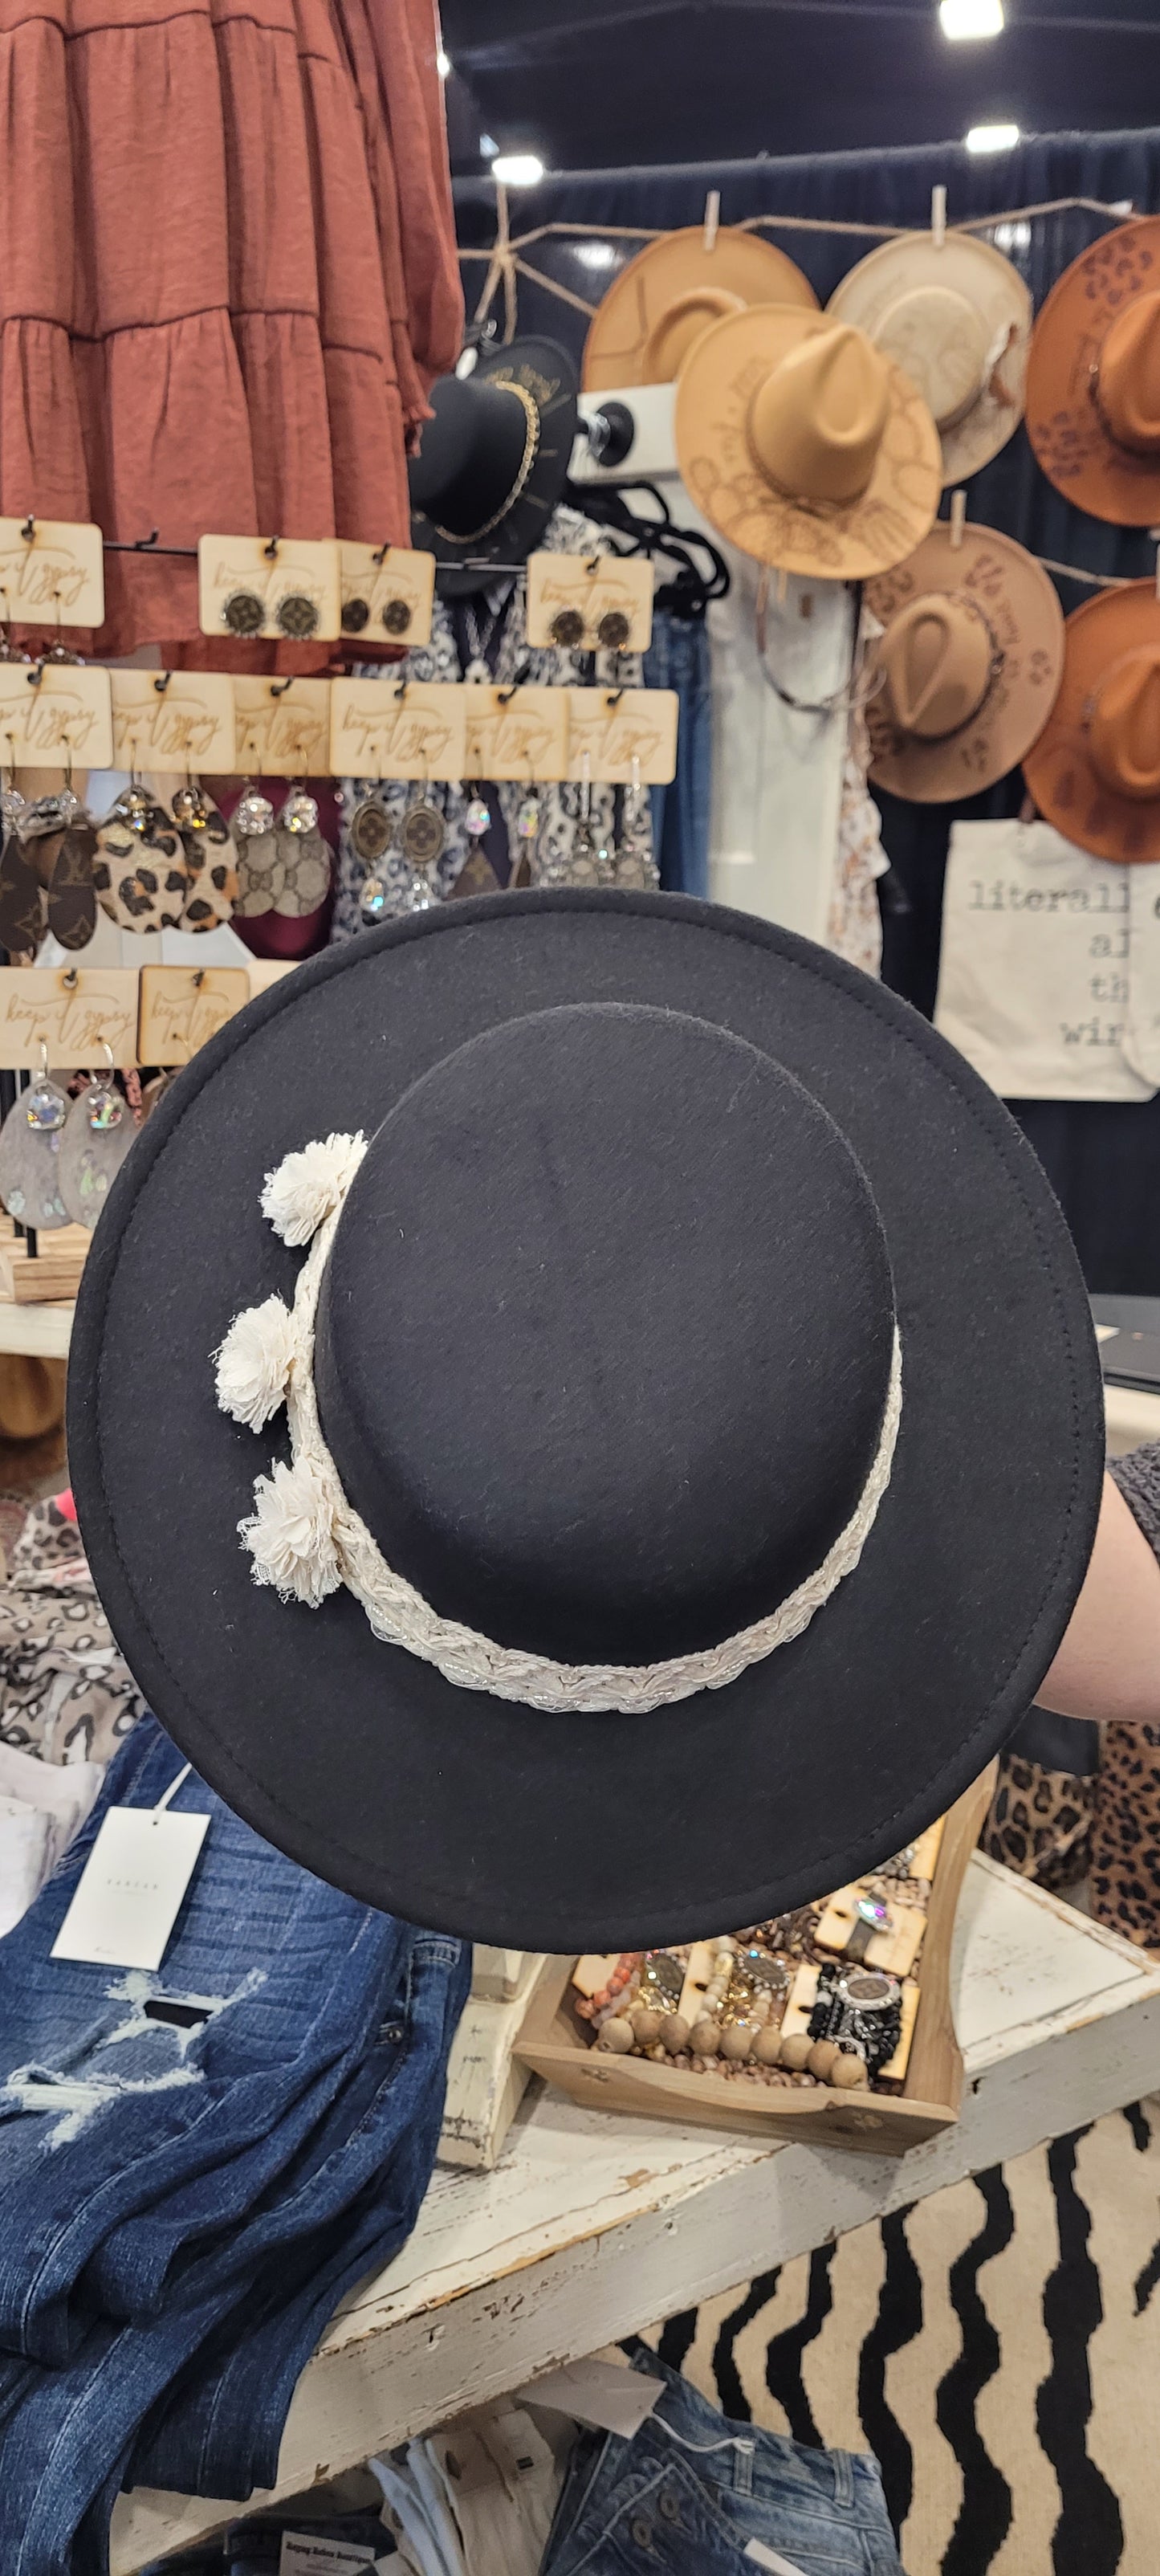 Features lace and pearl ribbon & flowers Black brim hat Felt hat Flat brim 100% polyester Ribbon drawstring for hat size adjustment Head Circumference: 24" Crown Height: 3.5" Brim Length: 13.5" Brim Width: 12.75" Branded & numbered inside crown Custom designed by Kayla